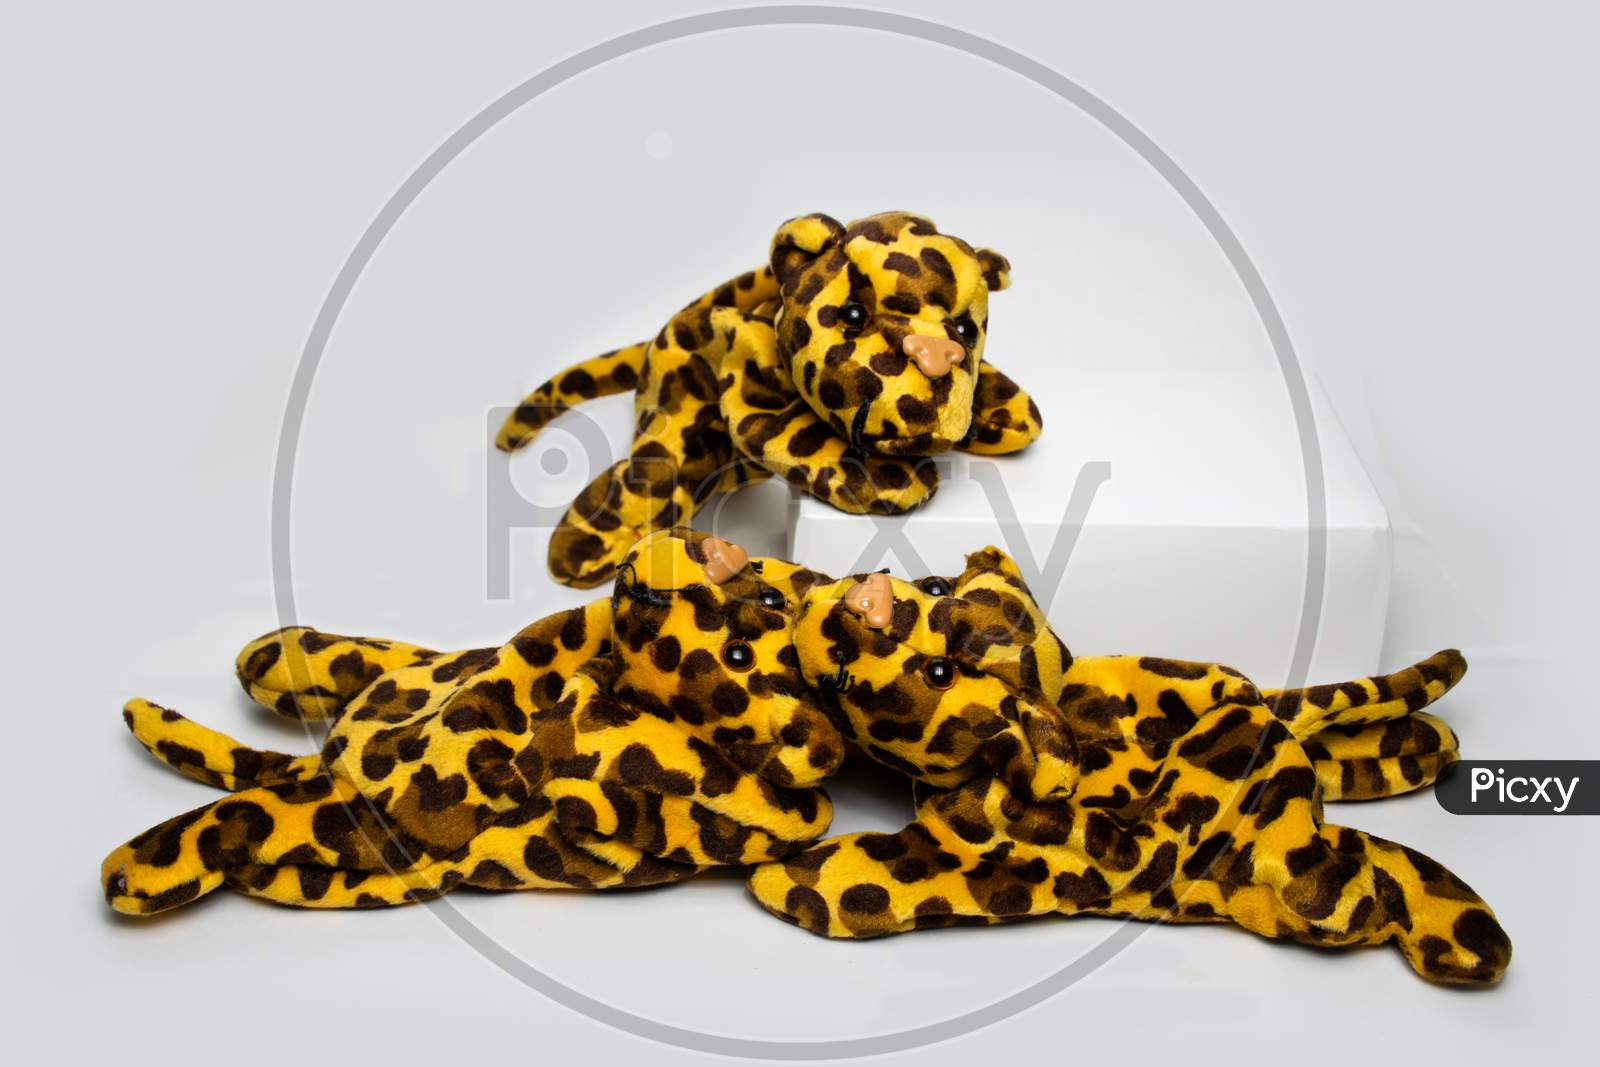 Three Playing Stuffed Leopard Soft Toys Isolated On A Plain White Background